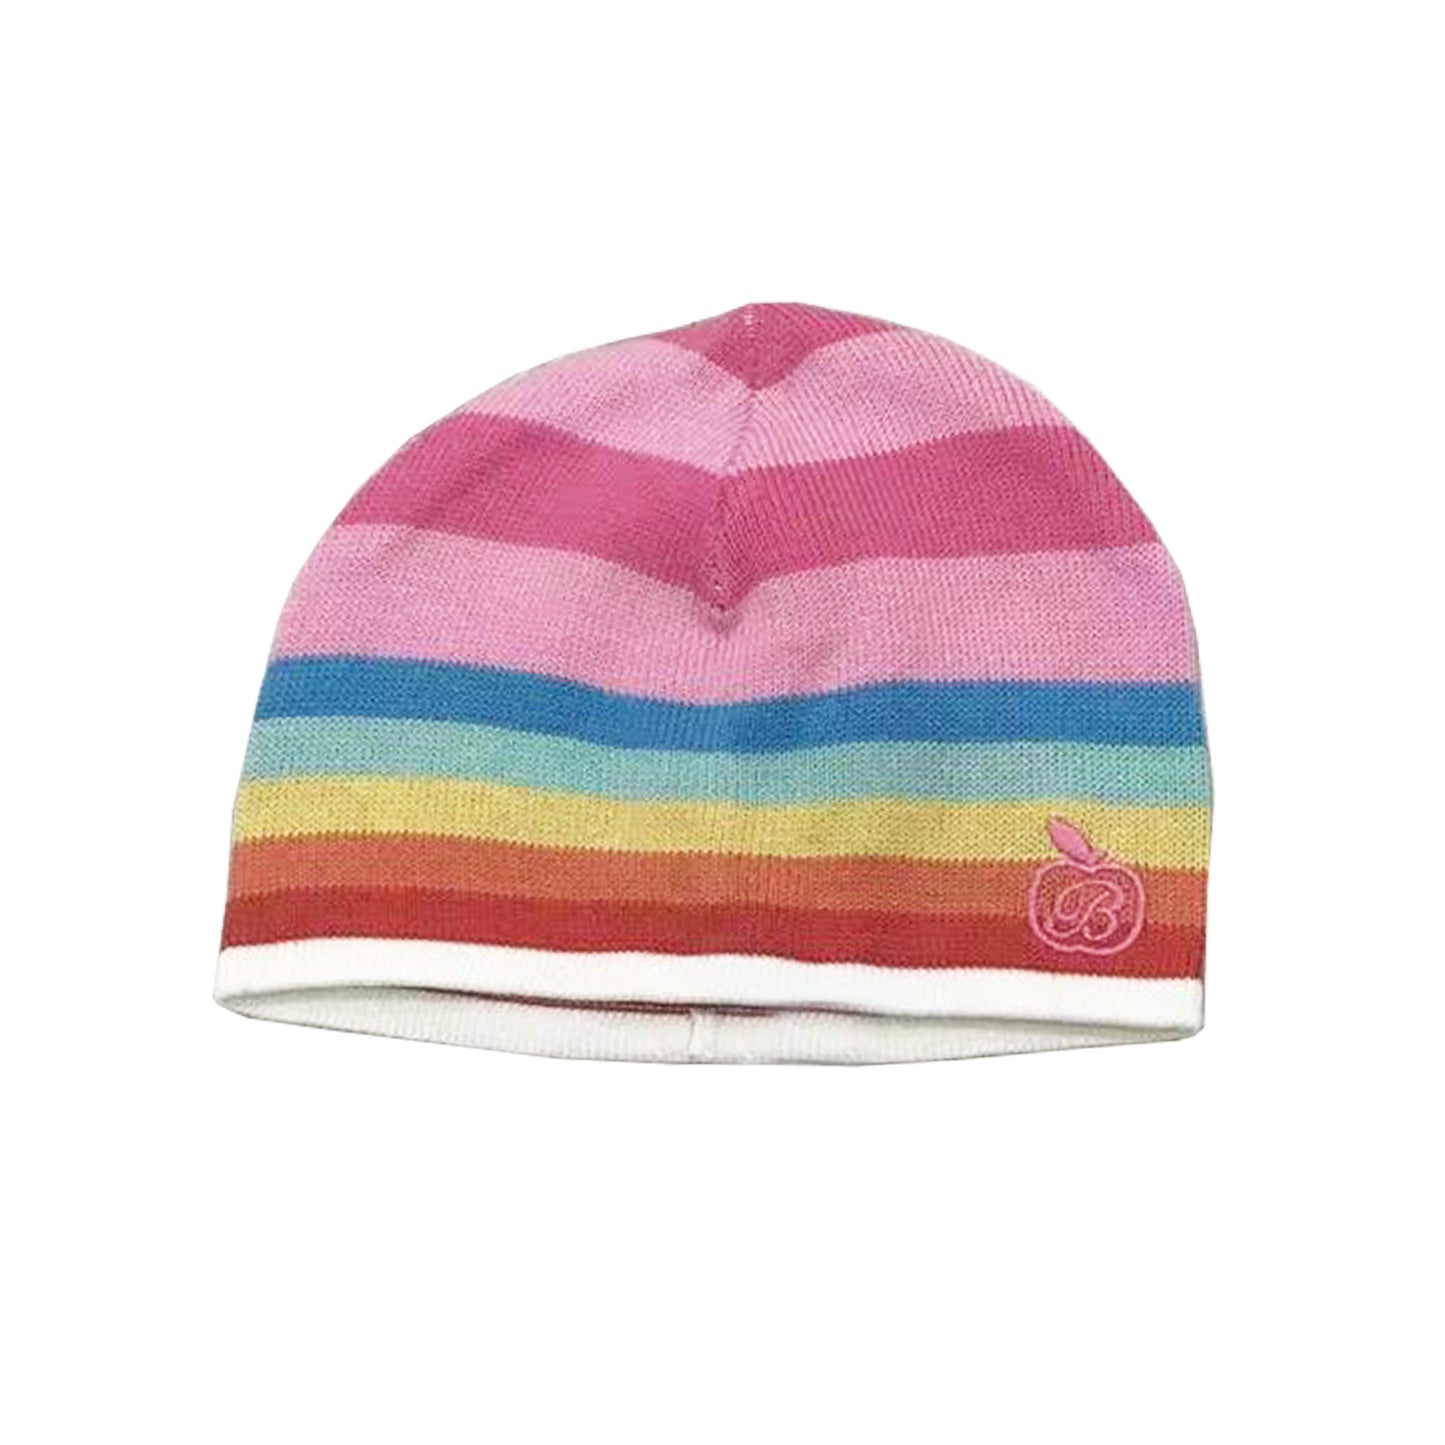 HAT - BABY - PINK - RUDY